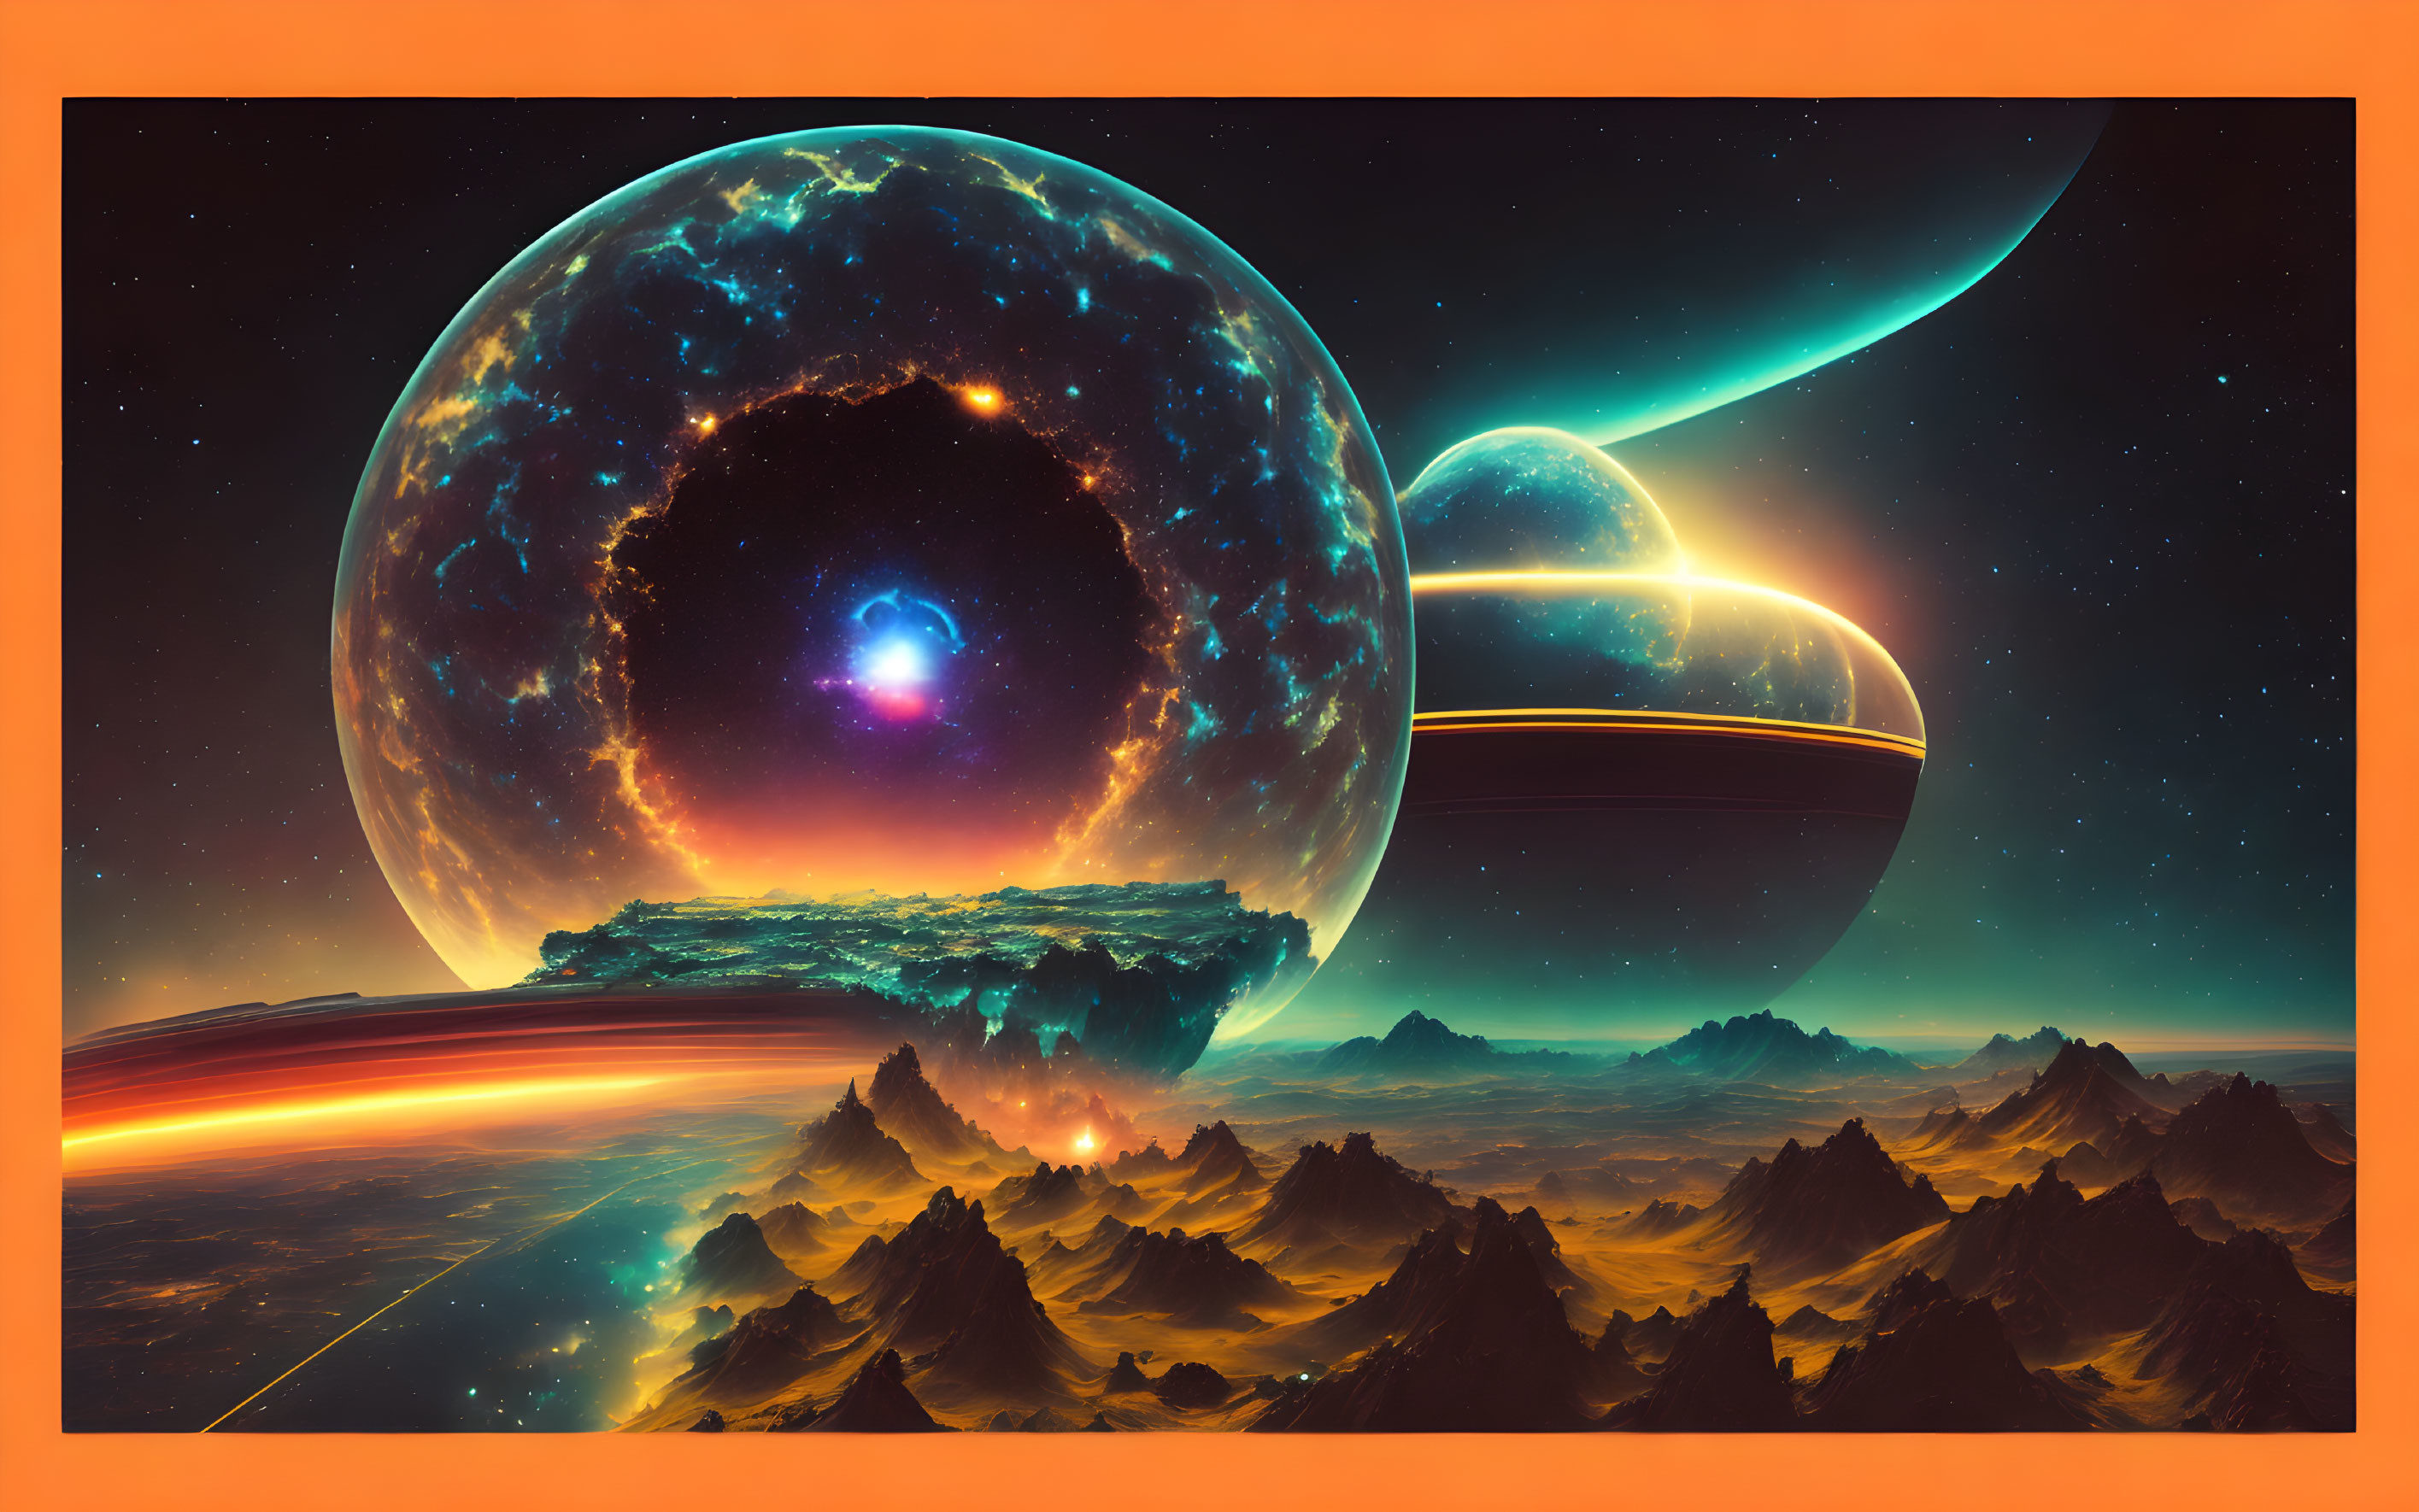 Floating mountains, giant planets, and colorful nebulas in surreal sci-fi landscape.